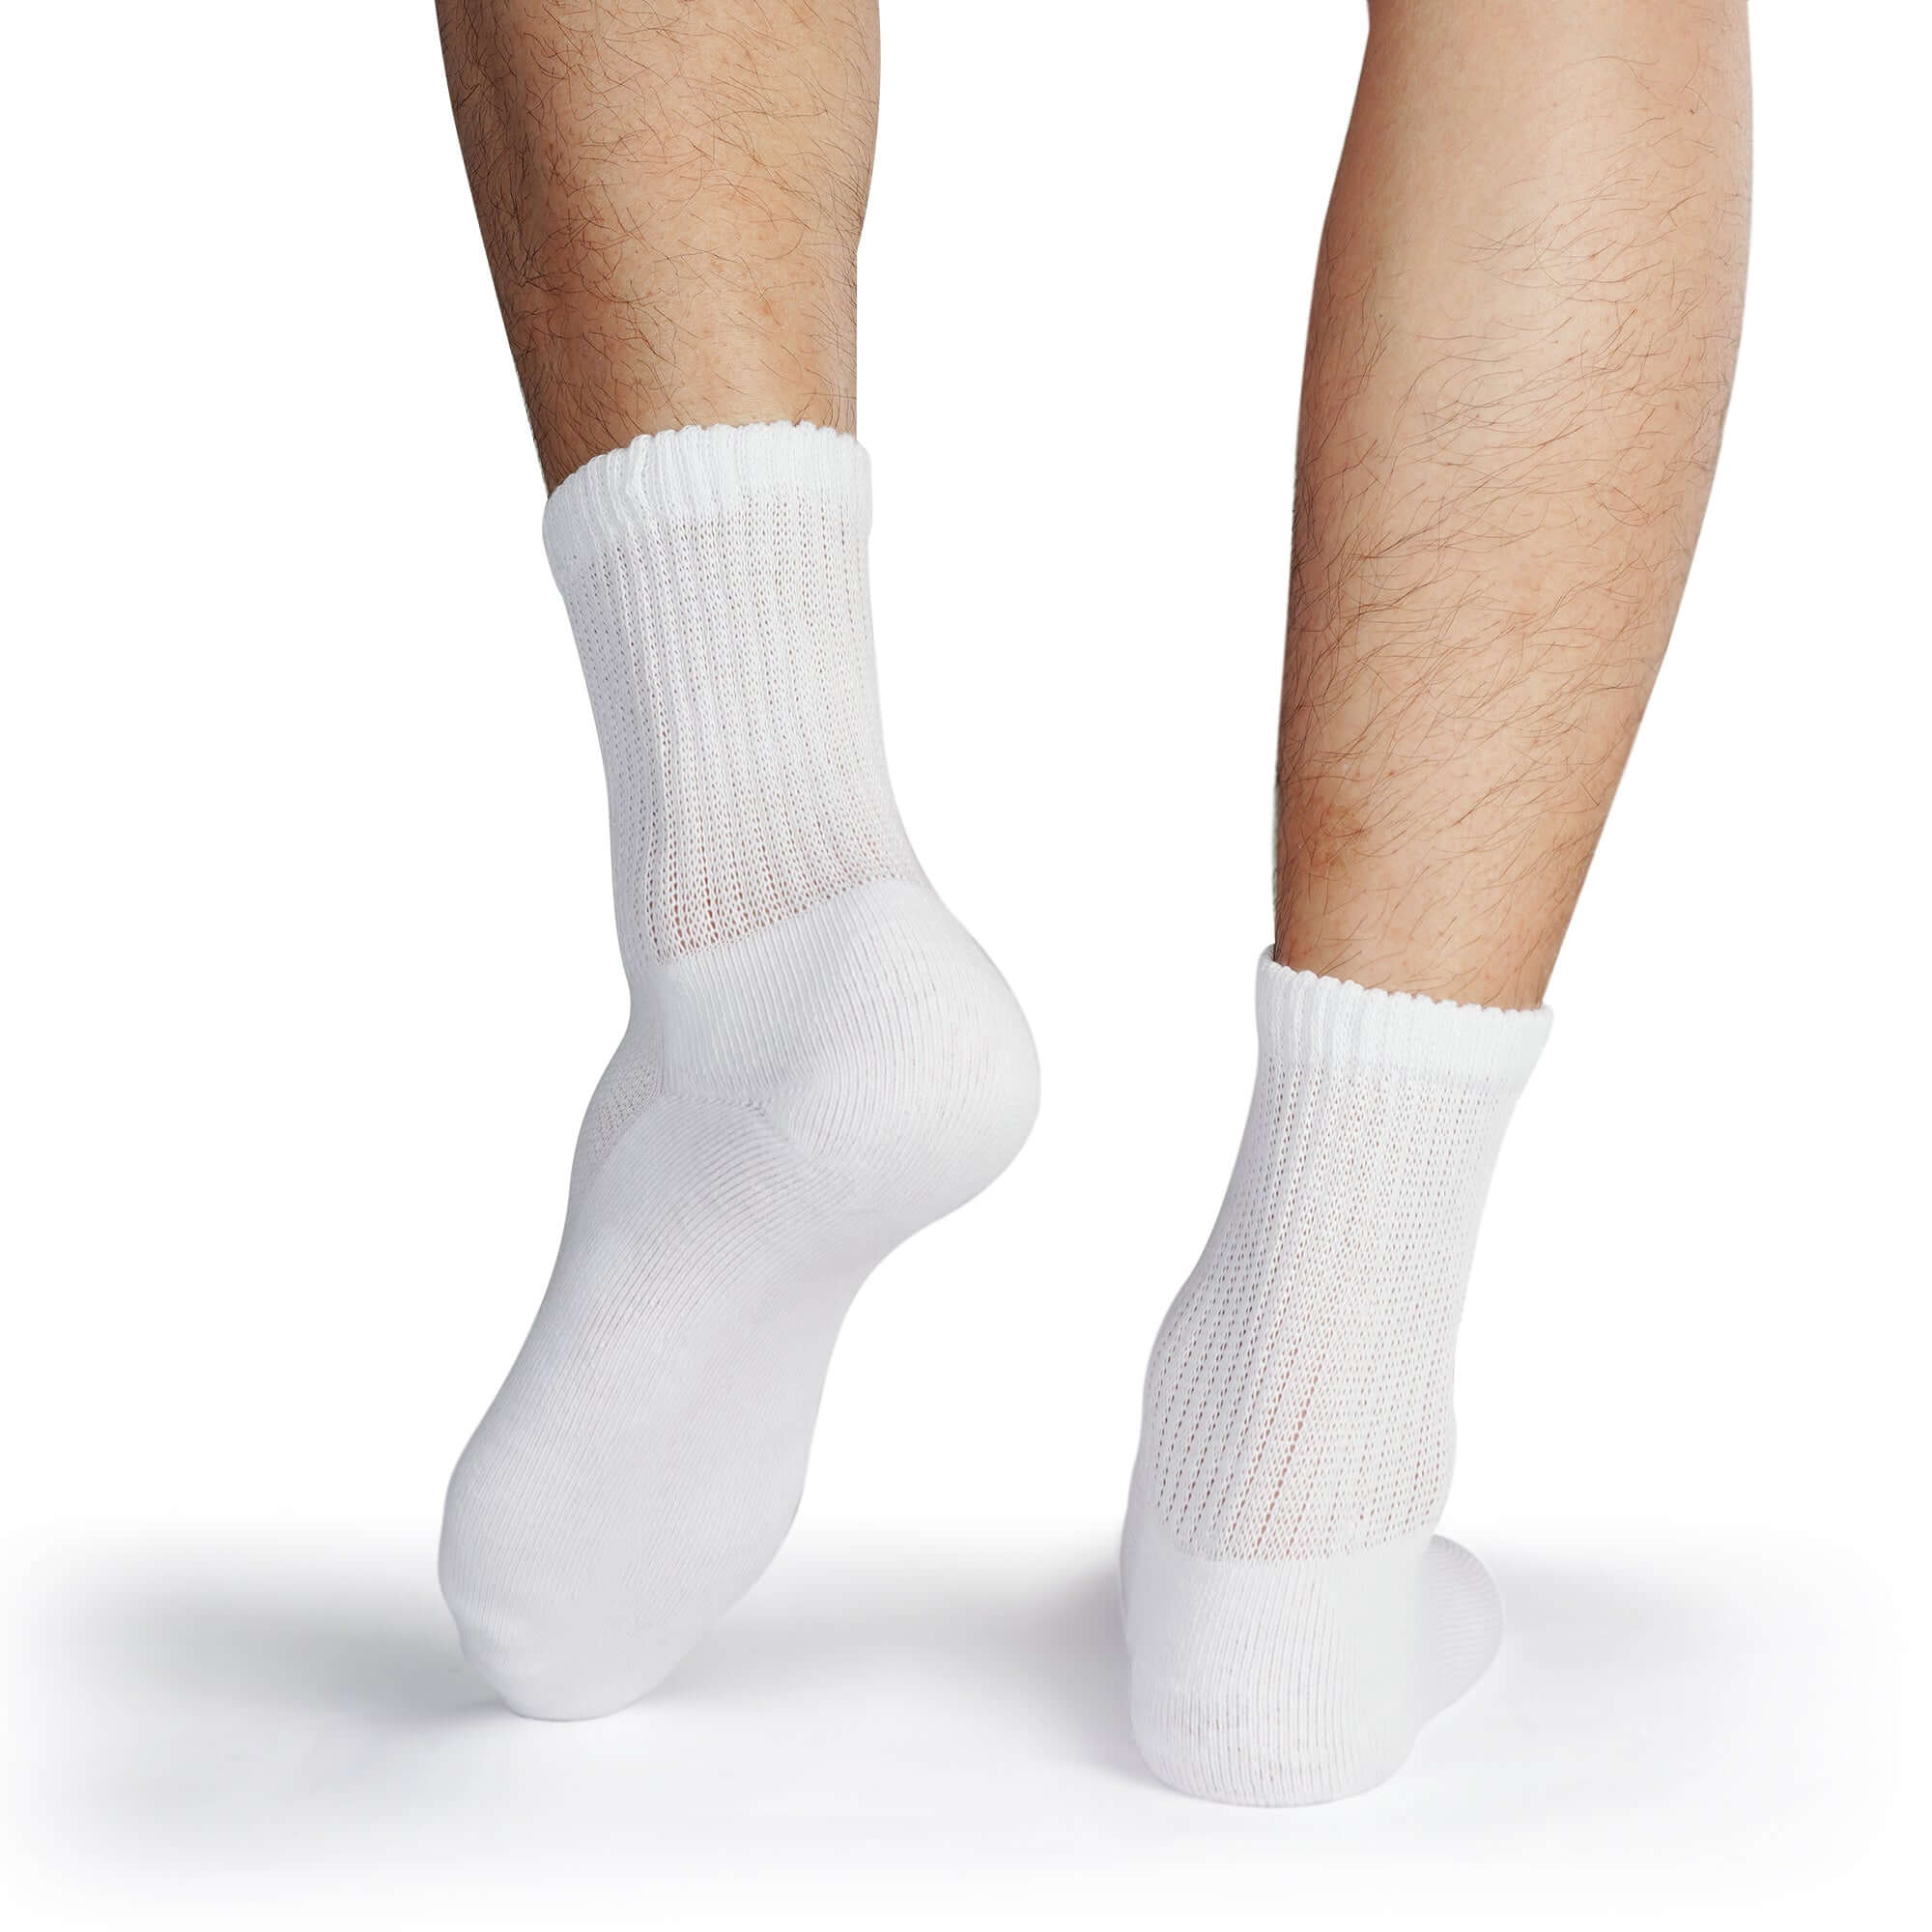 Breathable Cotton Diabetic Socks, with Seamless Toe and Cushion Sole 4 Pack - md-diab